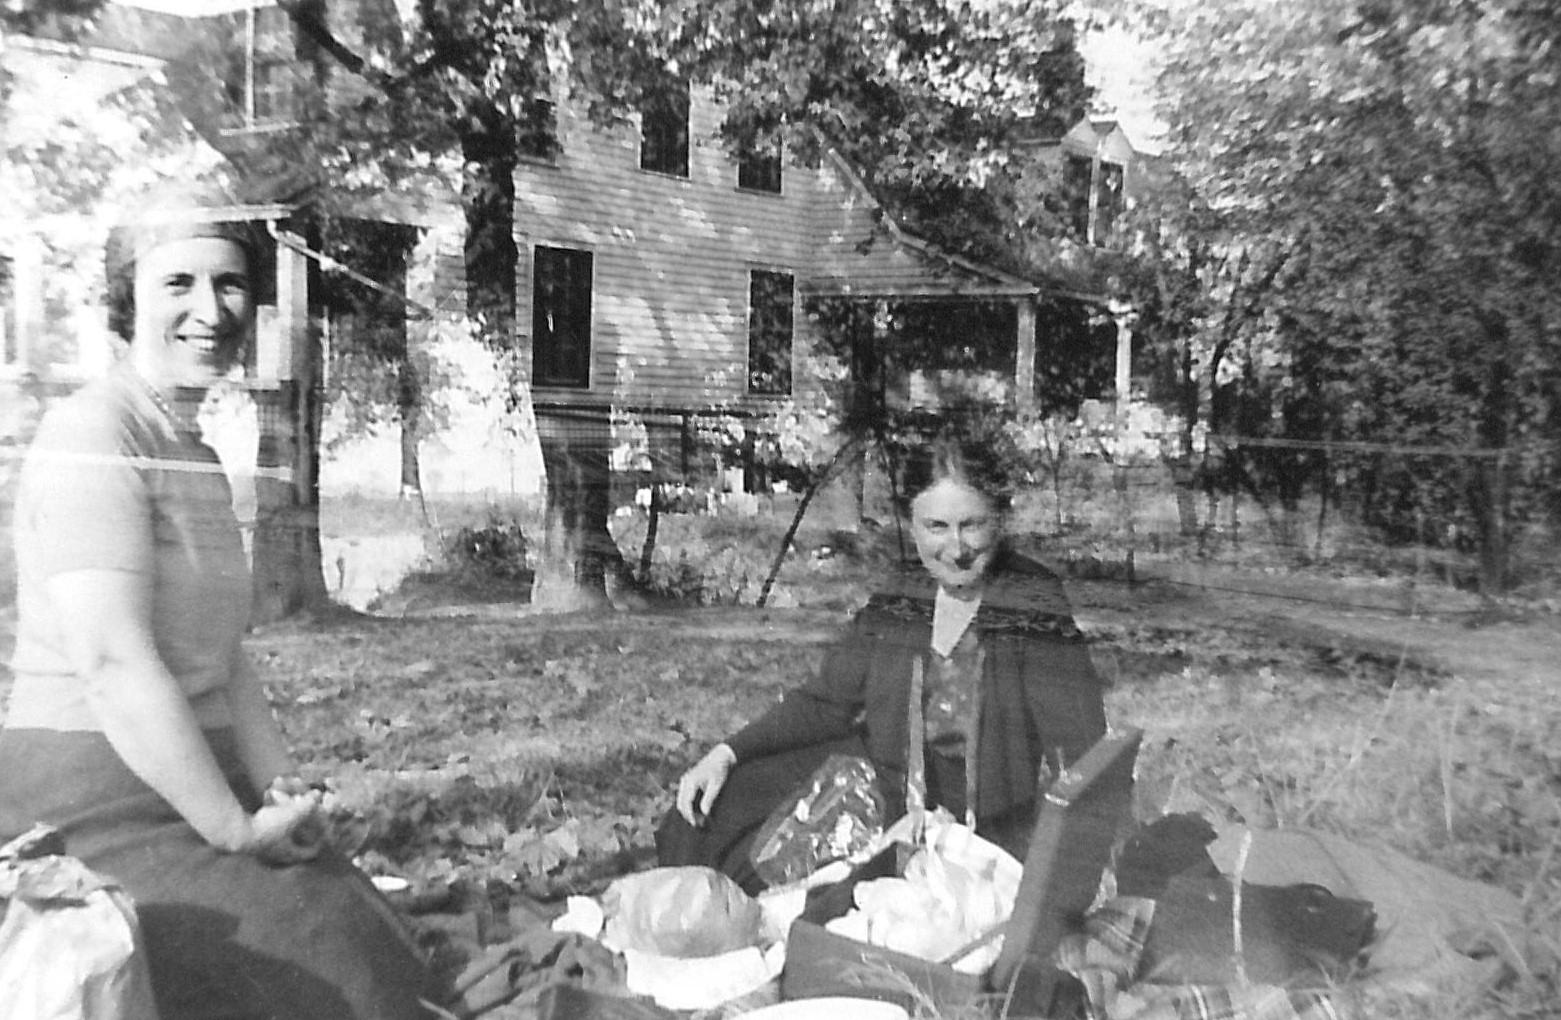 Black and white photo of two people having a picnic